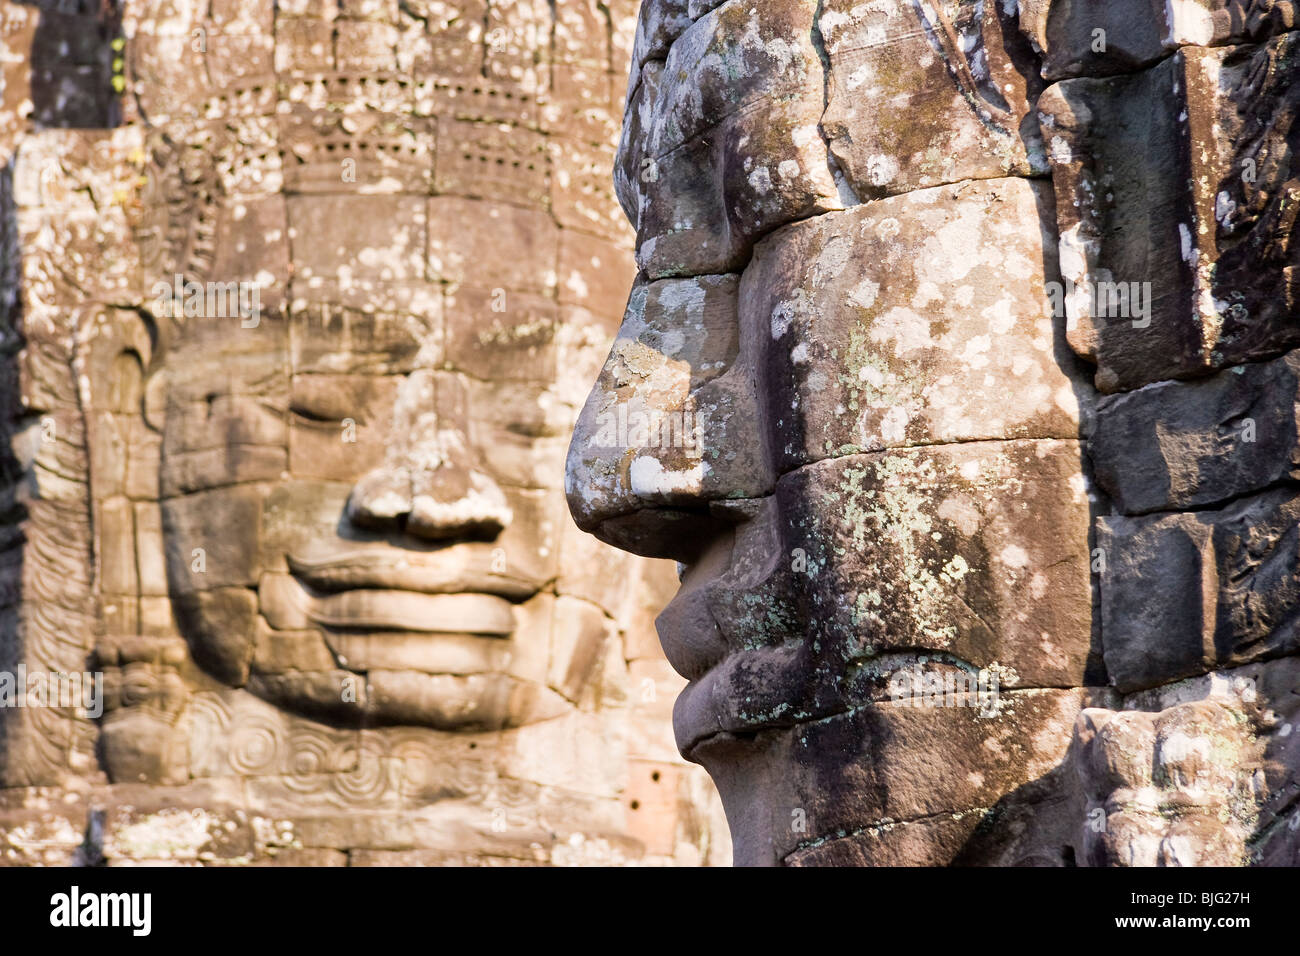 Two Enigmatic Face Towers forming part of The Bayon, Angkor Thom, Temples of Angkor, Cambodia, Indochina Stock Photo